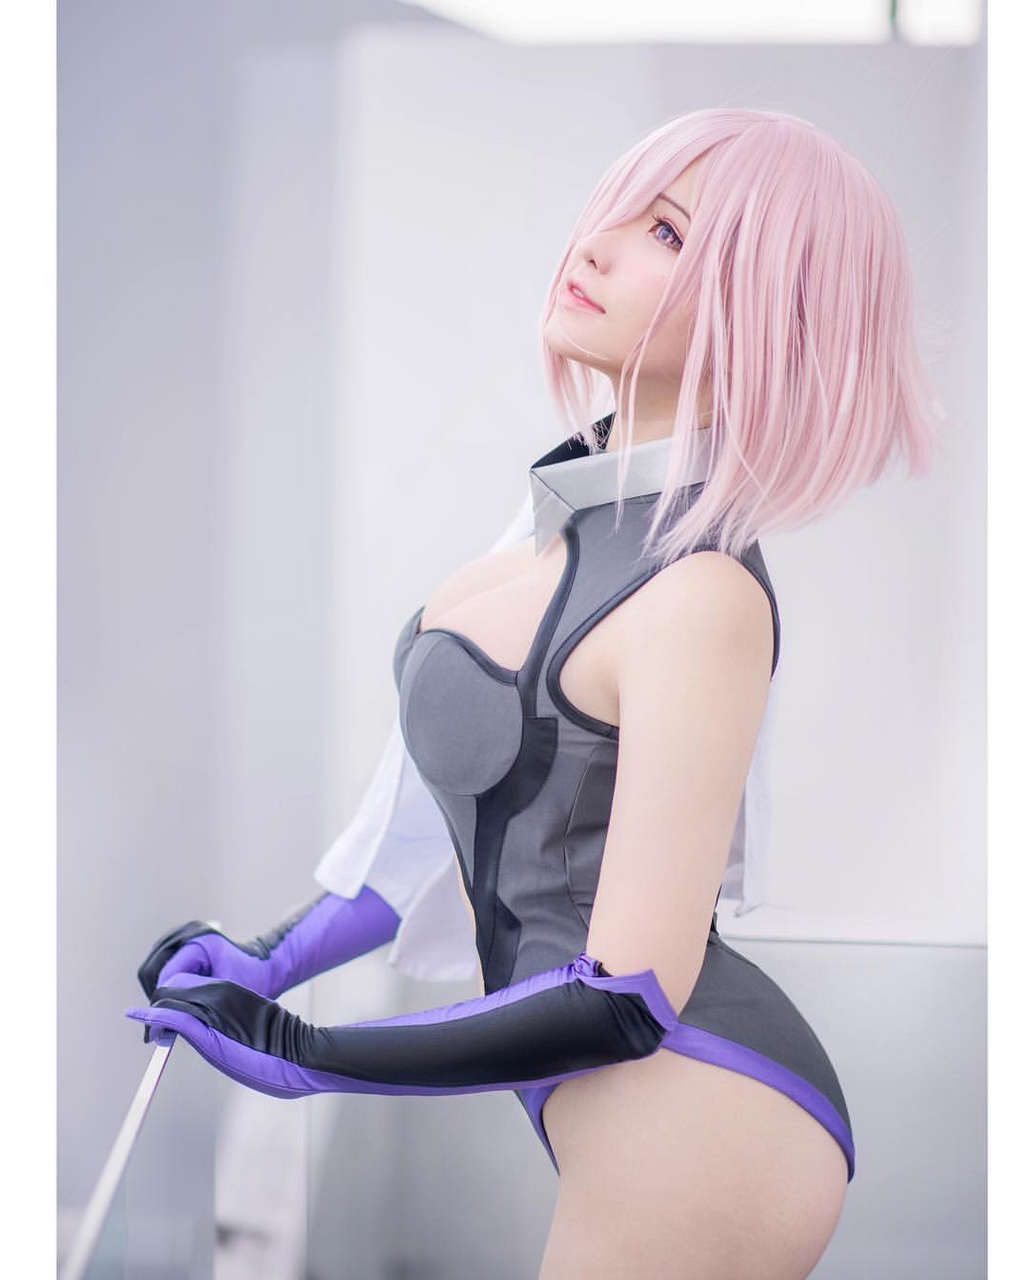 Mashu Kyrielight Fate Go By Lily Ig Plat Lil